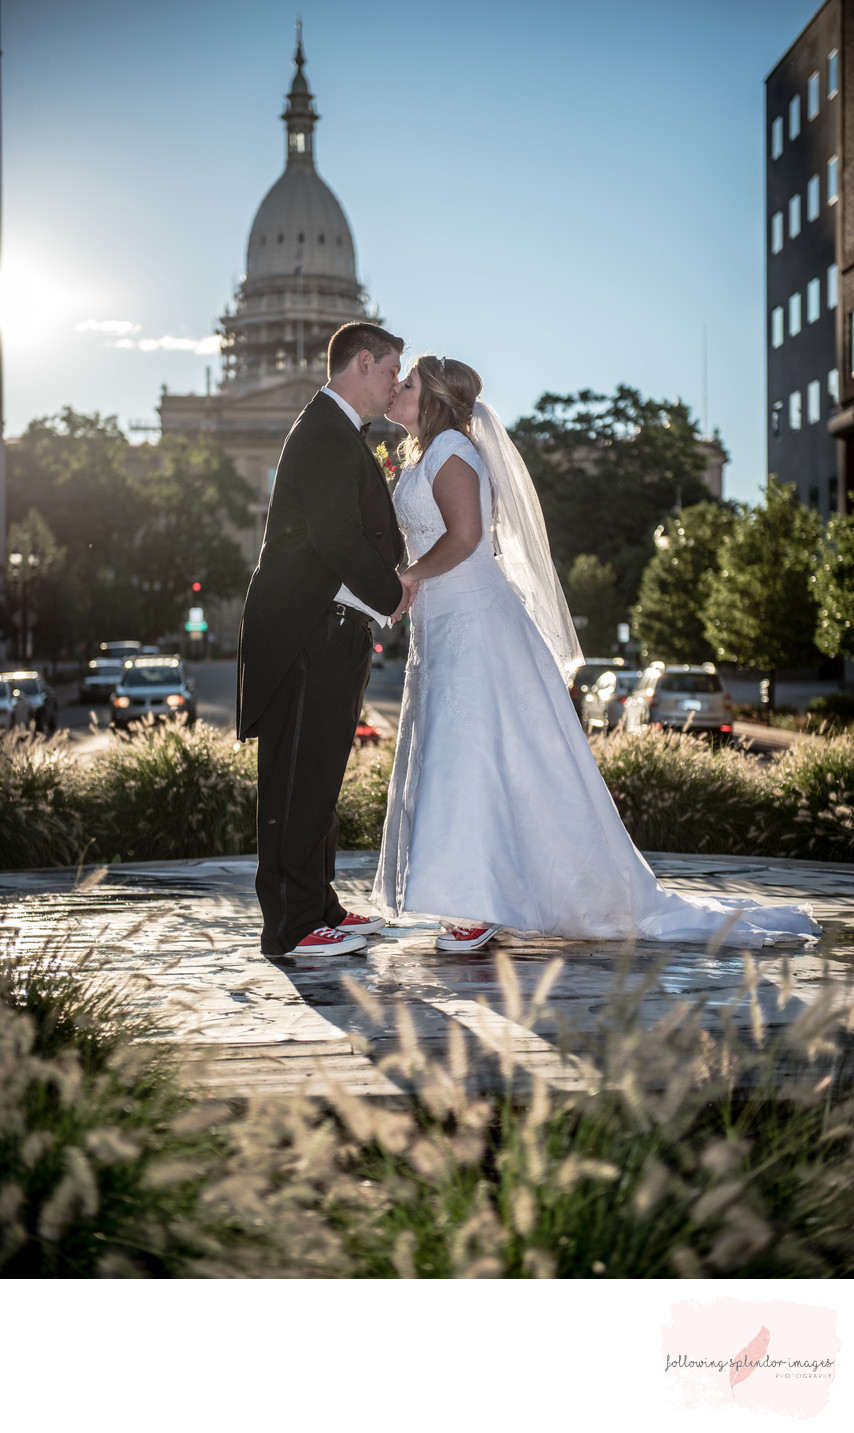 Wedding Photography At The Capital Building